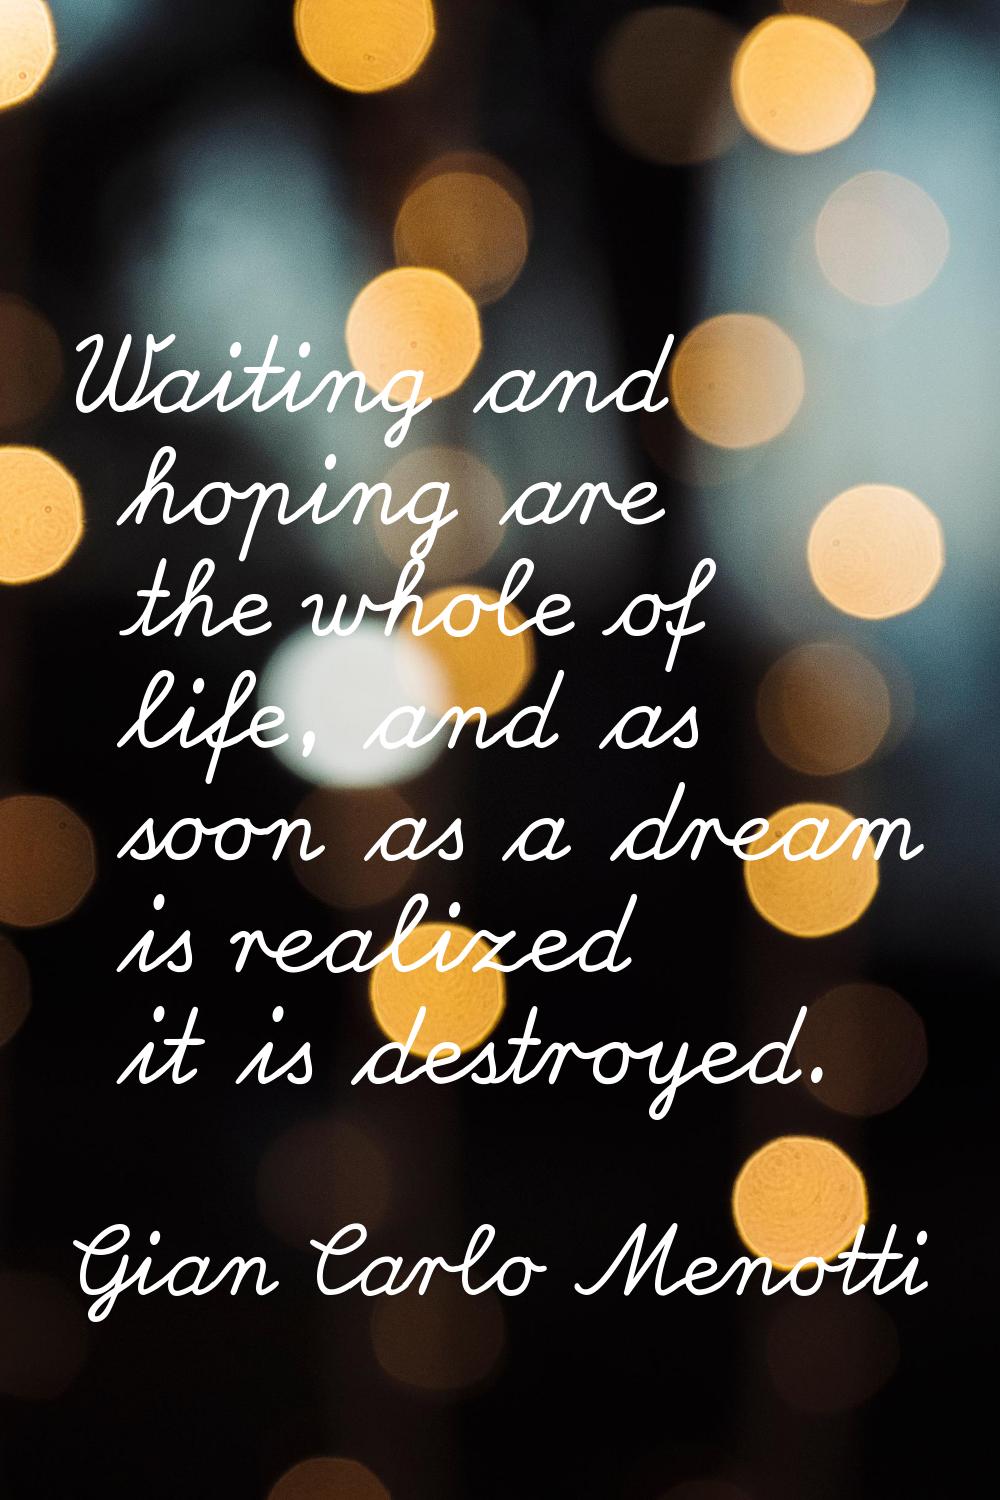 Waiting and hoping are the whole of life, and as soon as a dream is realized it is destroyed.